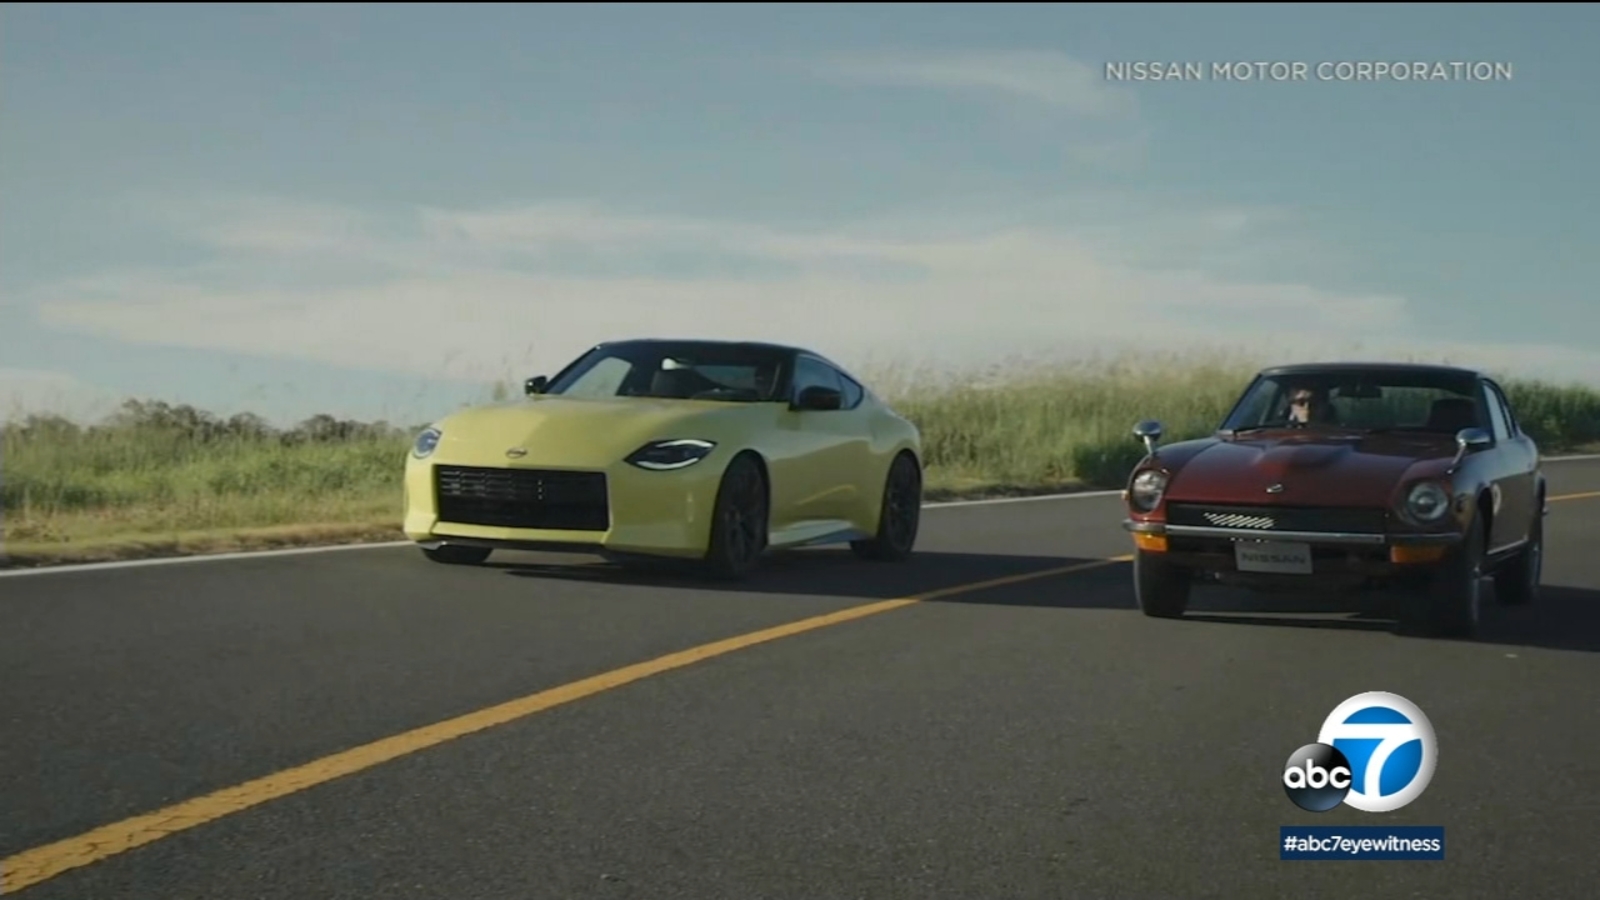 The new Nissan Z sports car pays homage to the original Datsun 240Z

